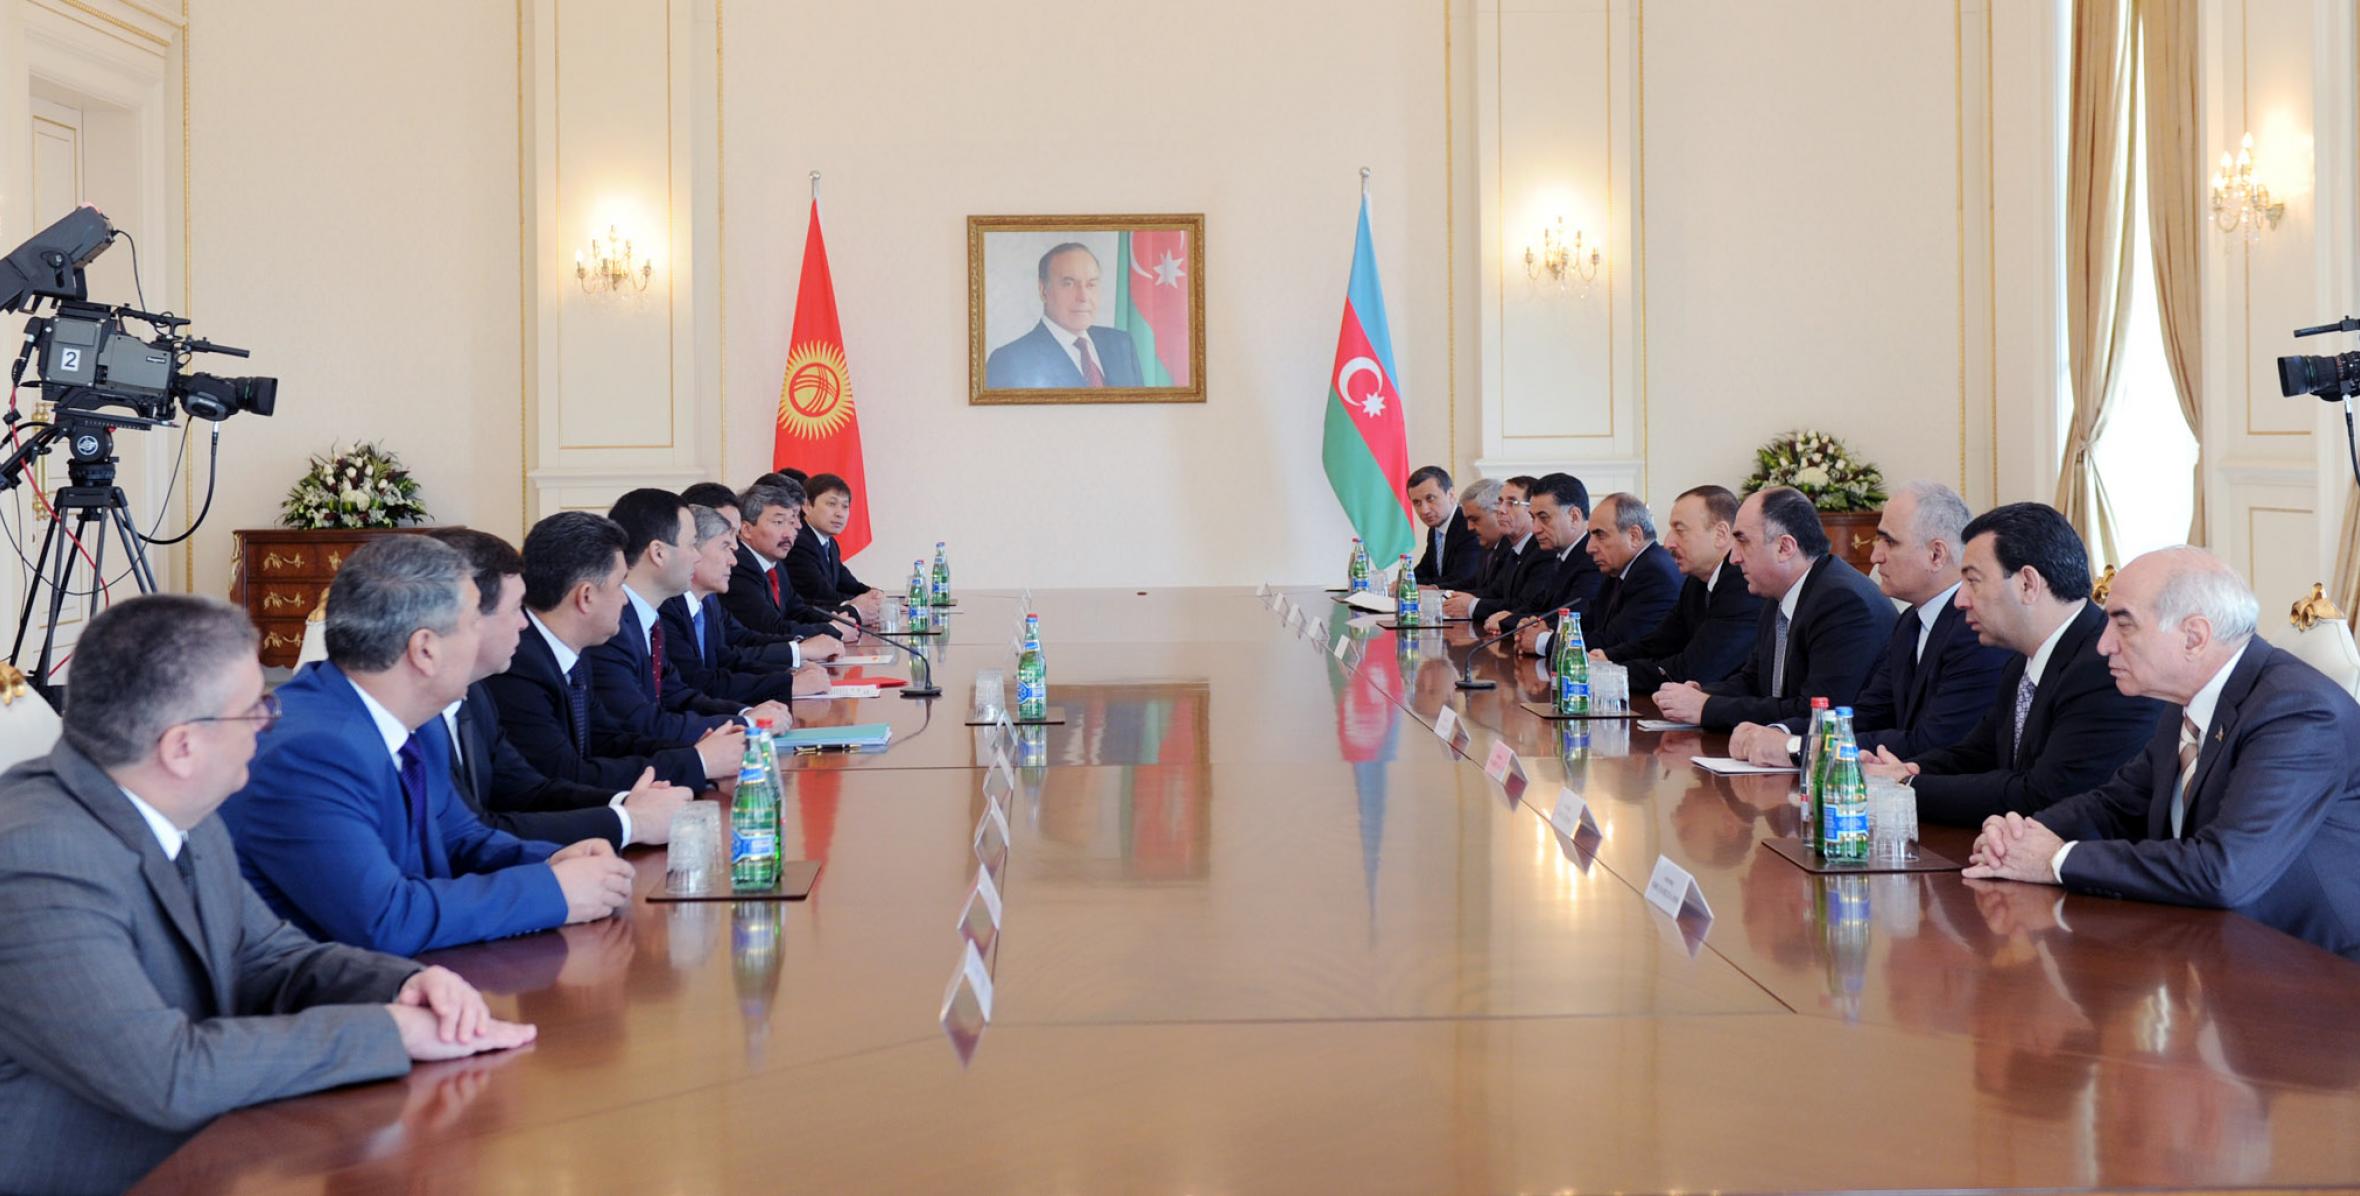 Ilham Aliyev and President of the Kyrgyz Republic Almazbek Atambayev held a meeting in an expanded format